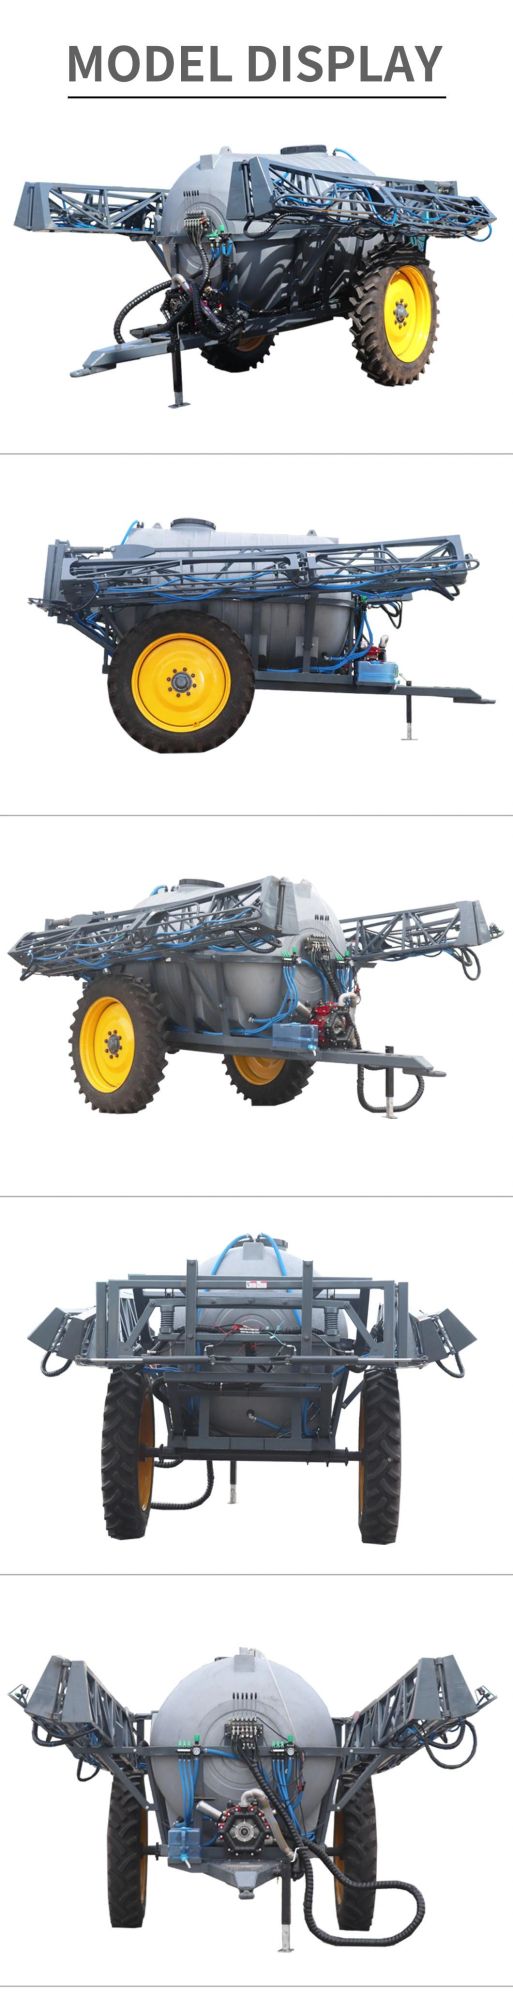 High Performance Farm Agricultural Tractor Implement Garden Tool Drawn Crop Boom Sprayer